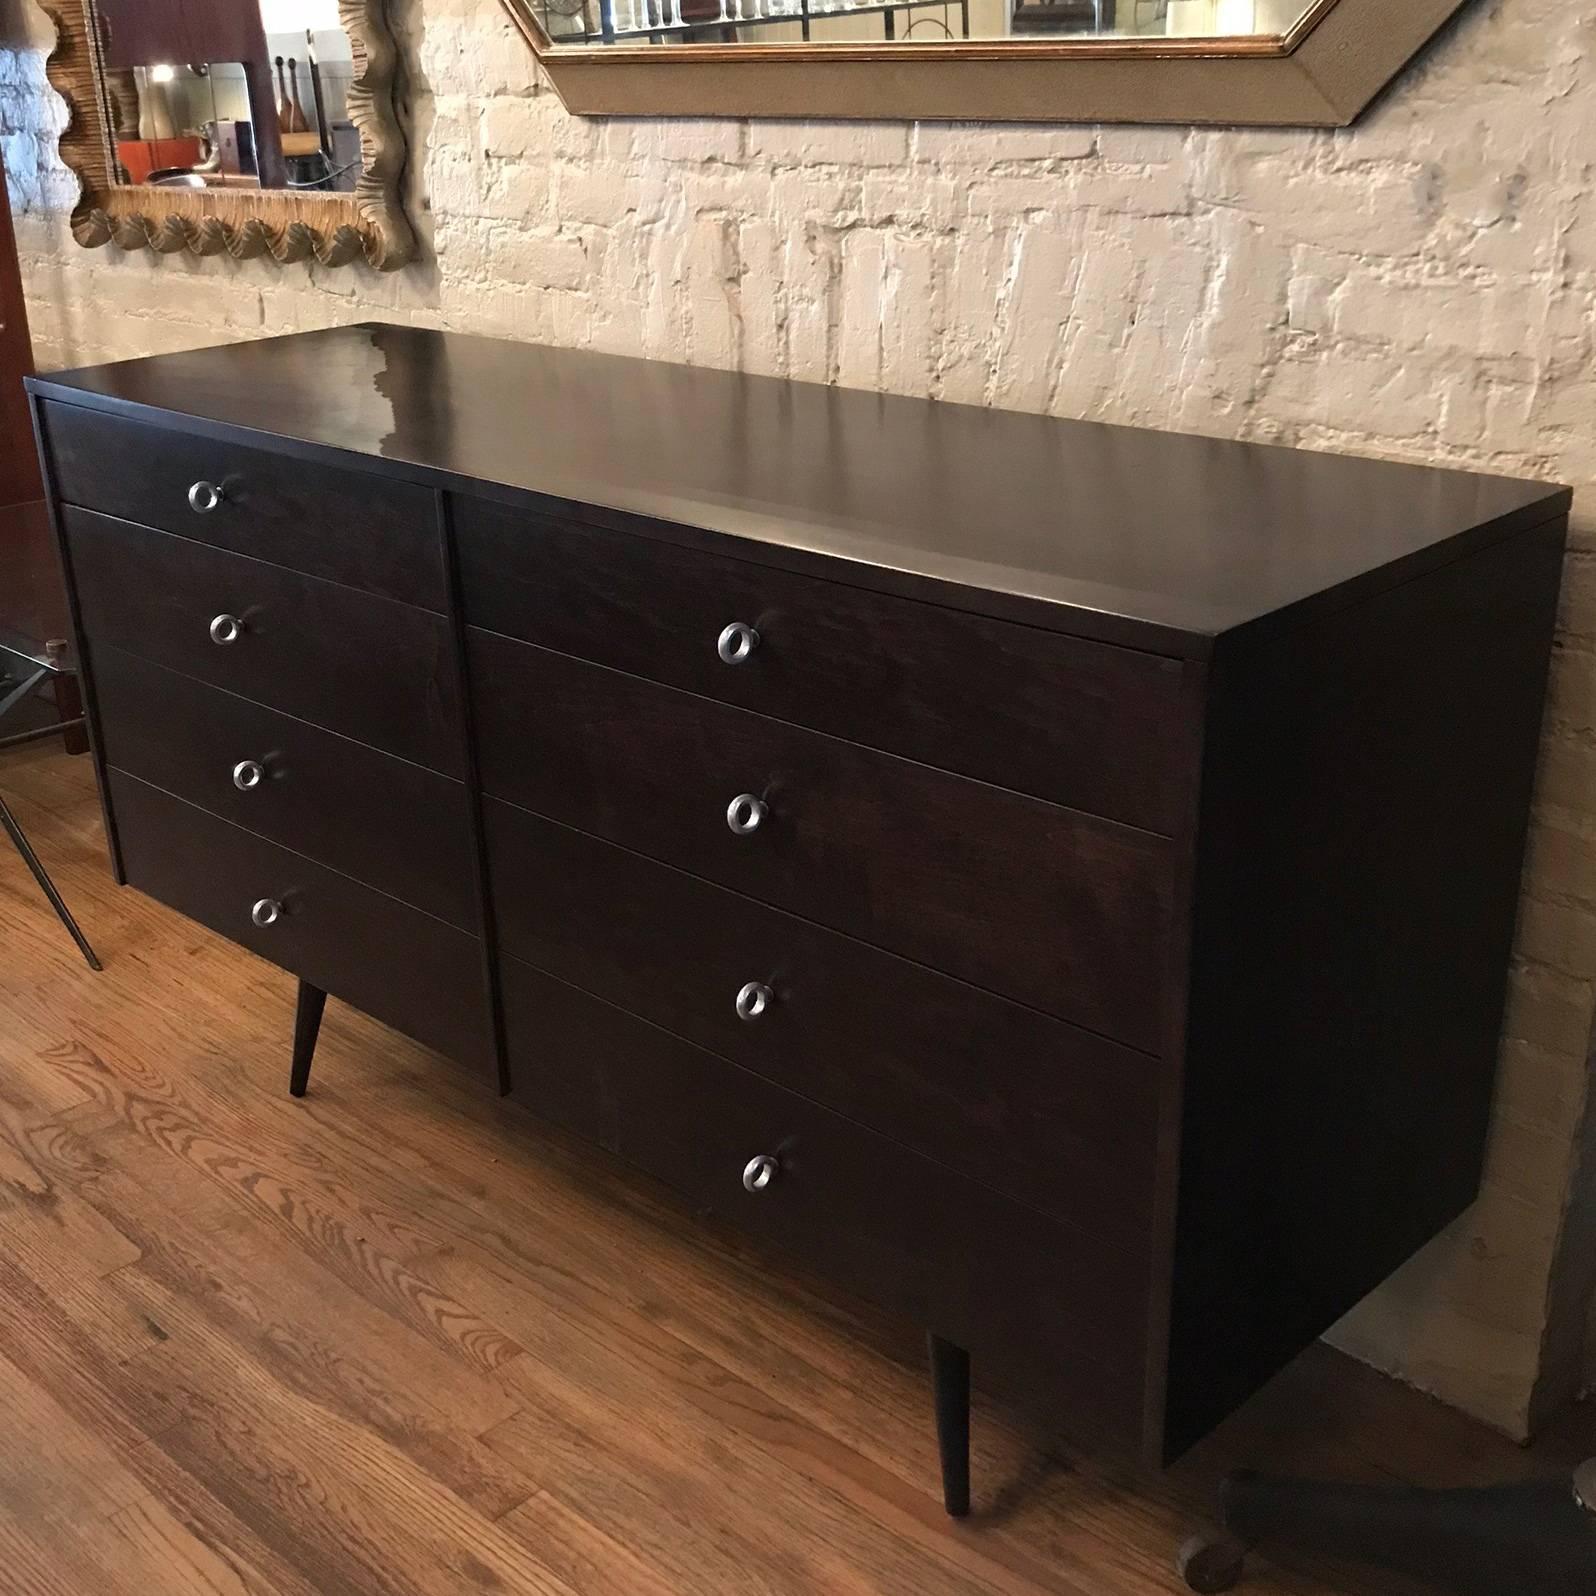 Mid-Century Modern, double wide, ebonized maple dresser designed by Paul McCobb for Planner Group, Winchendon features signature cast aluminium ring pulls and eight drawers for ample storage.